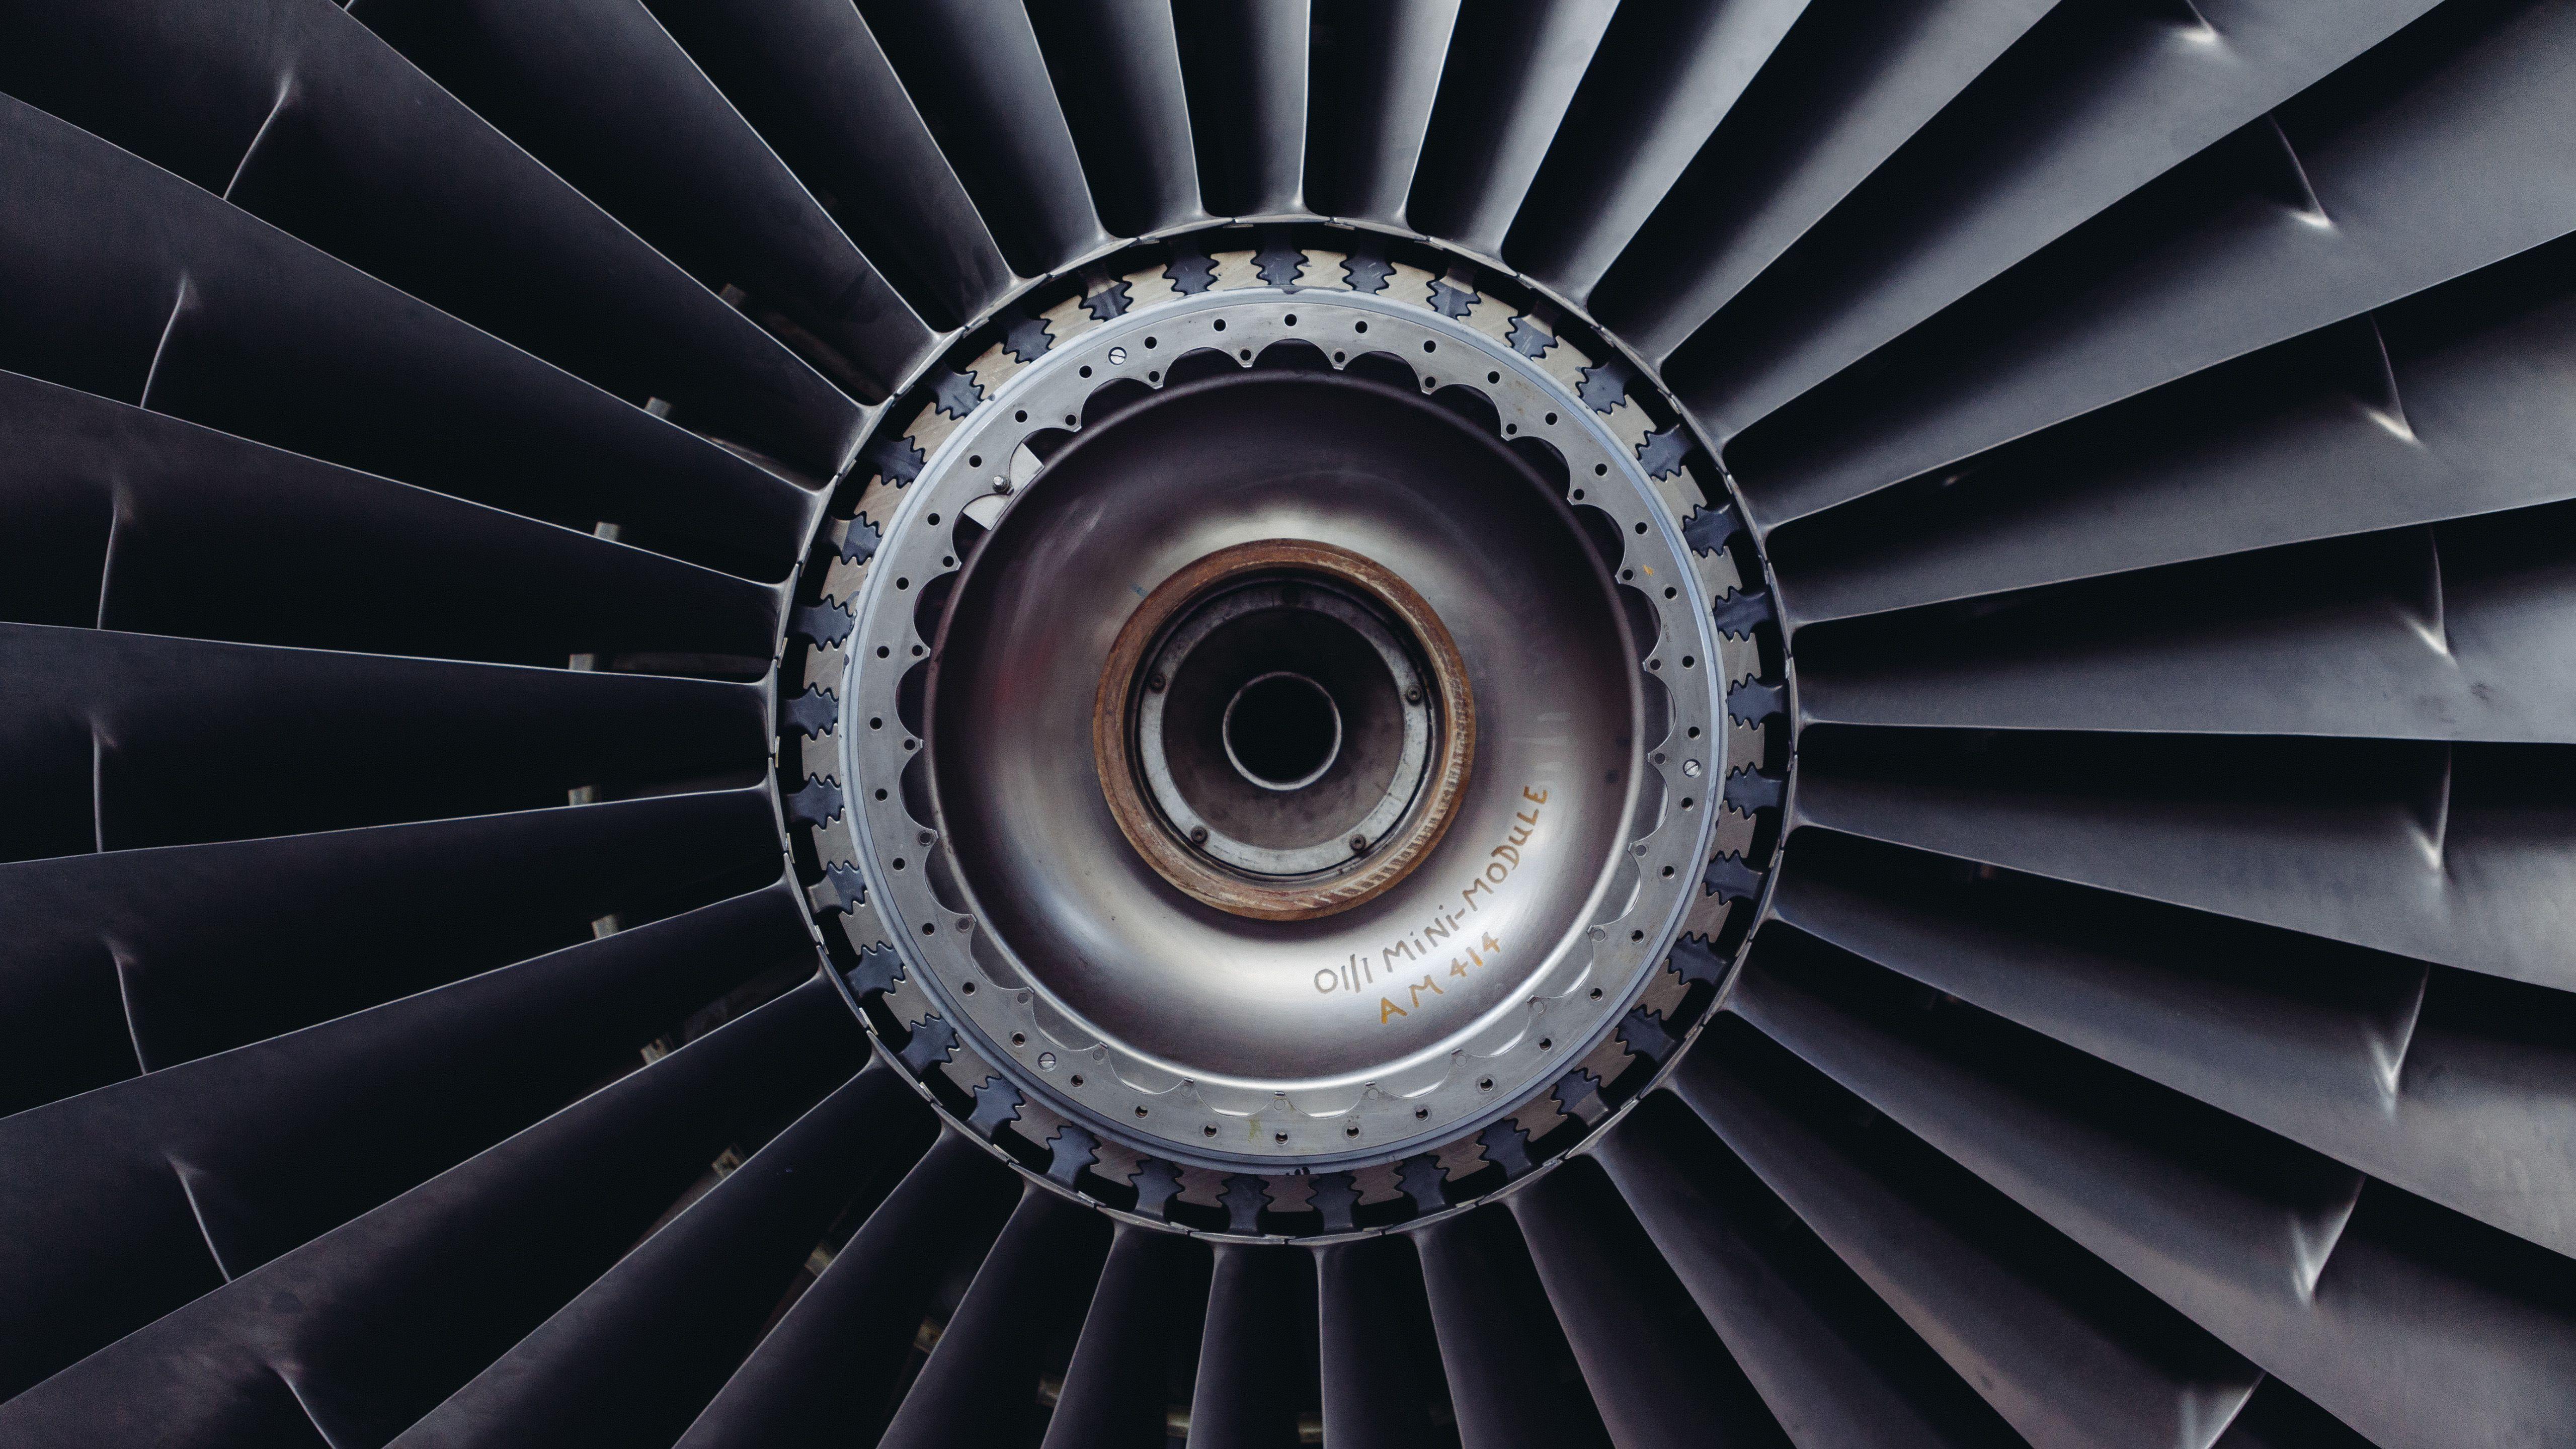 Jet Engine Wallpapers - Top Free Jet Engine Backgrounds ...